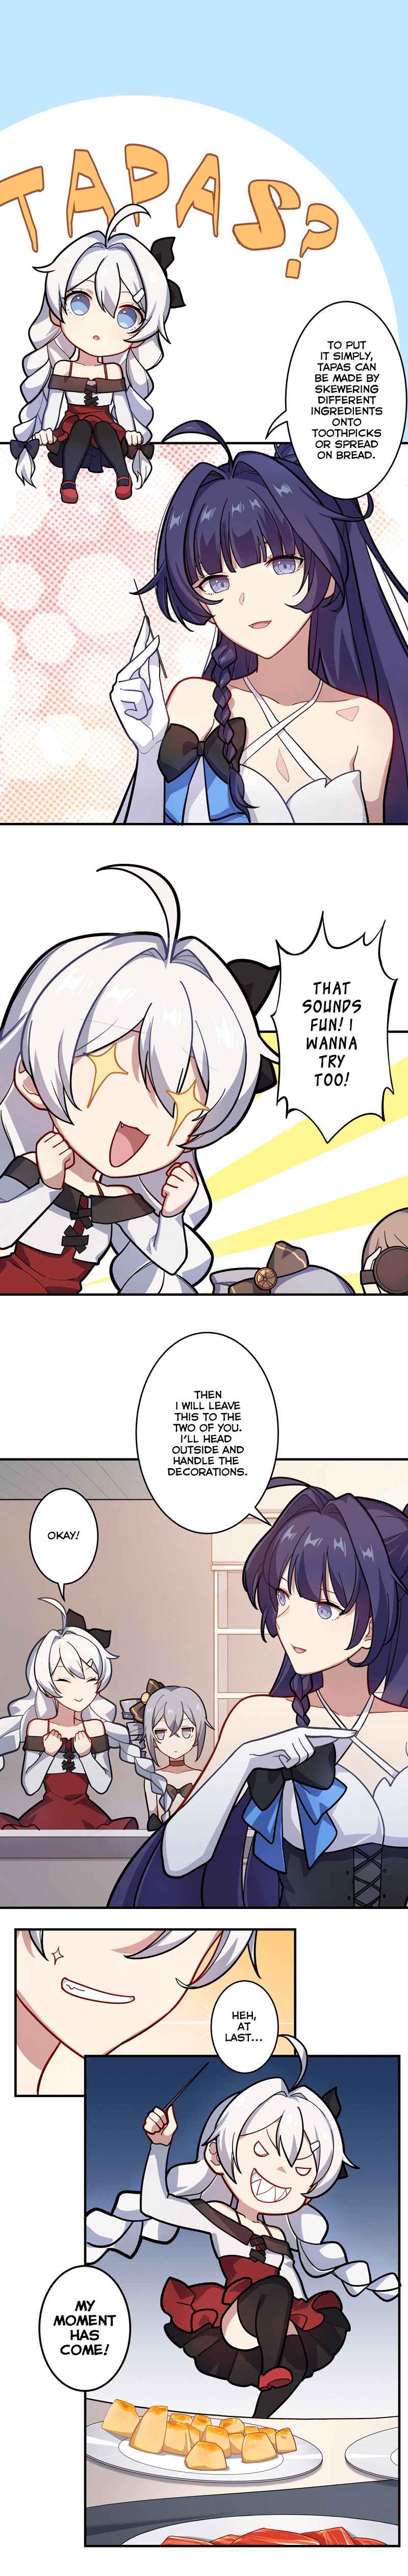 Honkai Impact 3rd Valkyries' Dining Escapades Ch. 10 The Tapas that Follow Your Heart's Desires